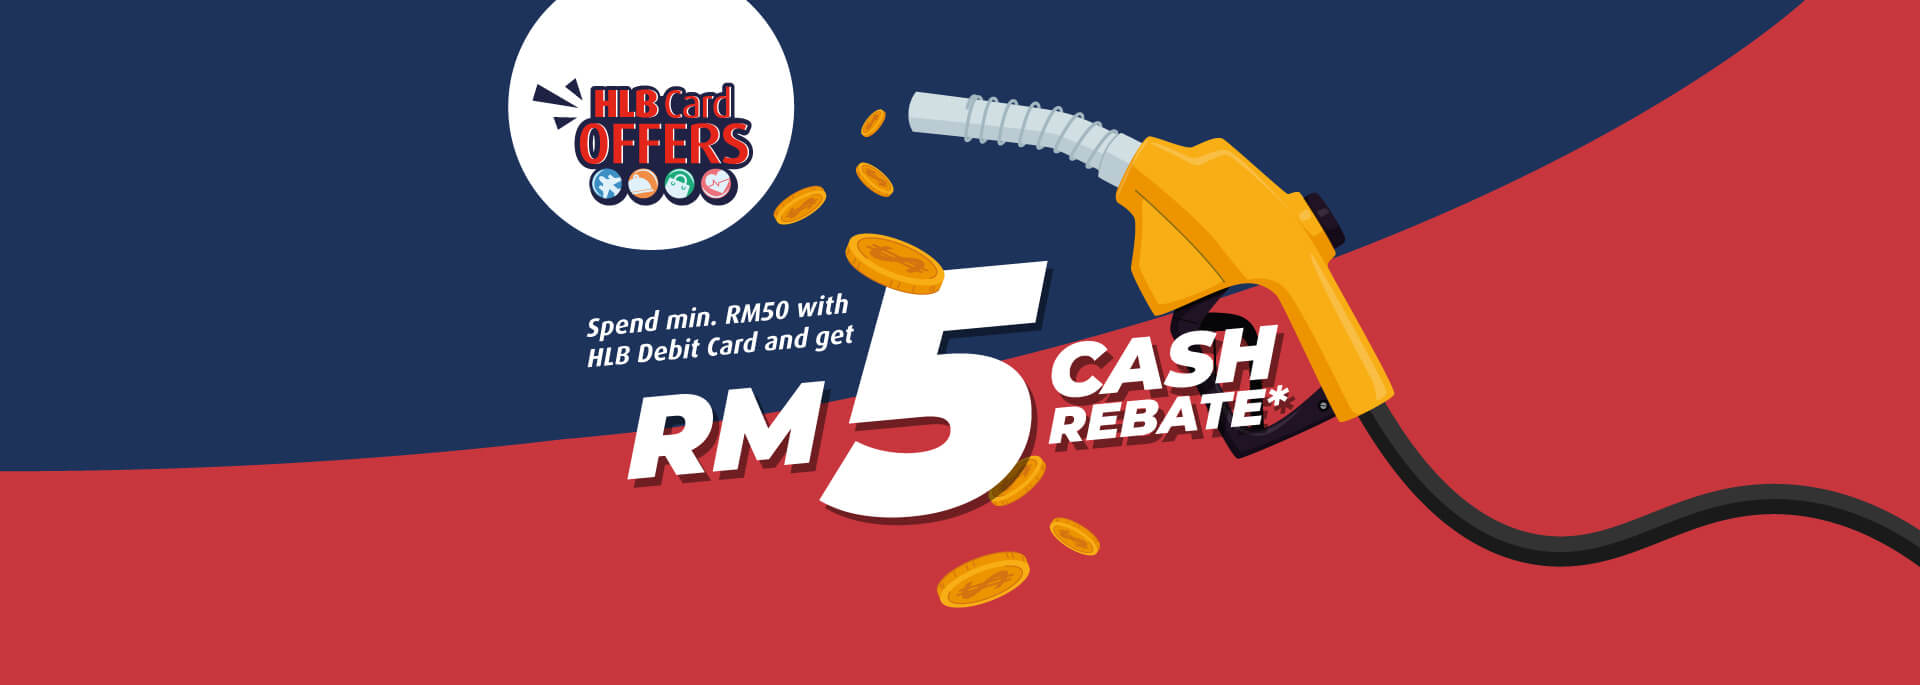 Fuel up now at Shell with your HLB Debit Card and get Cash Rebate